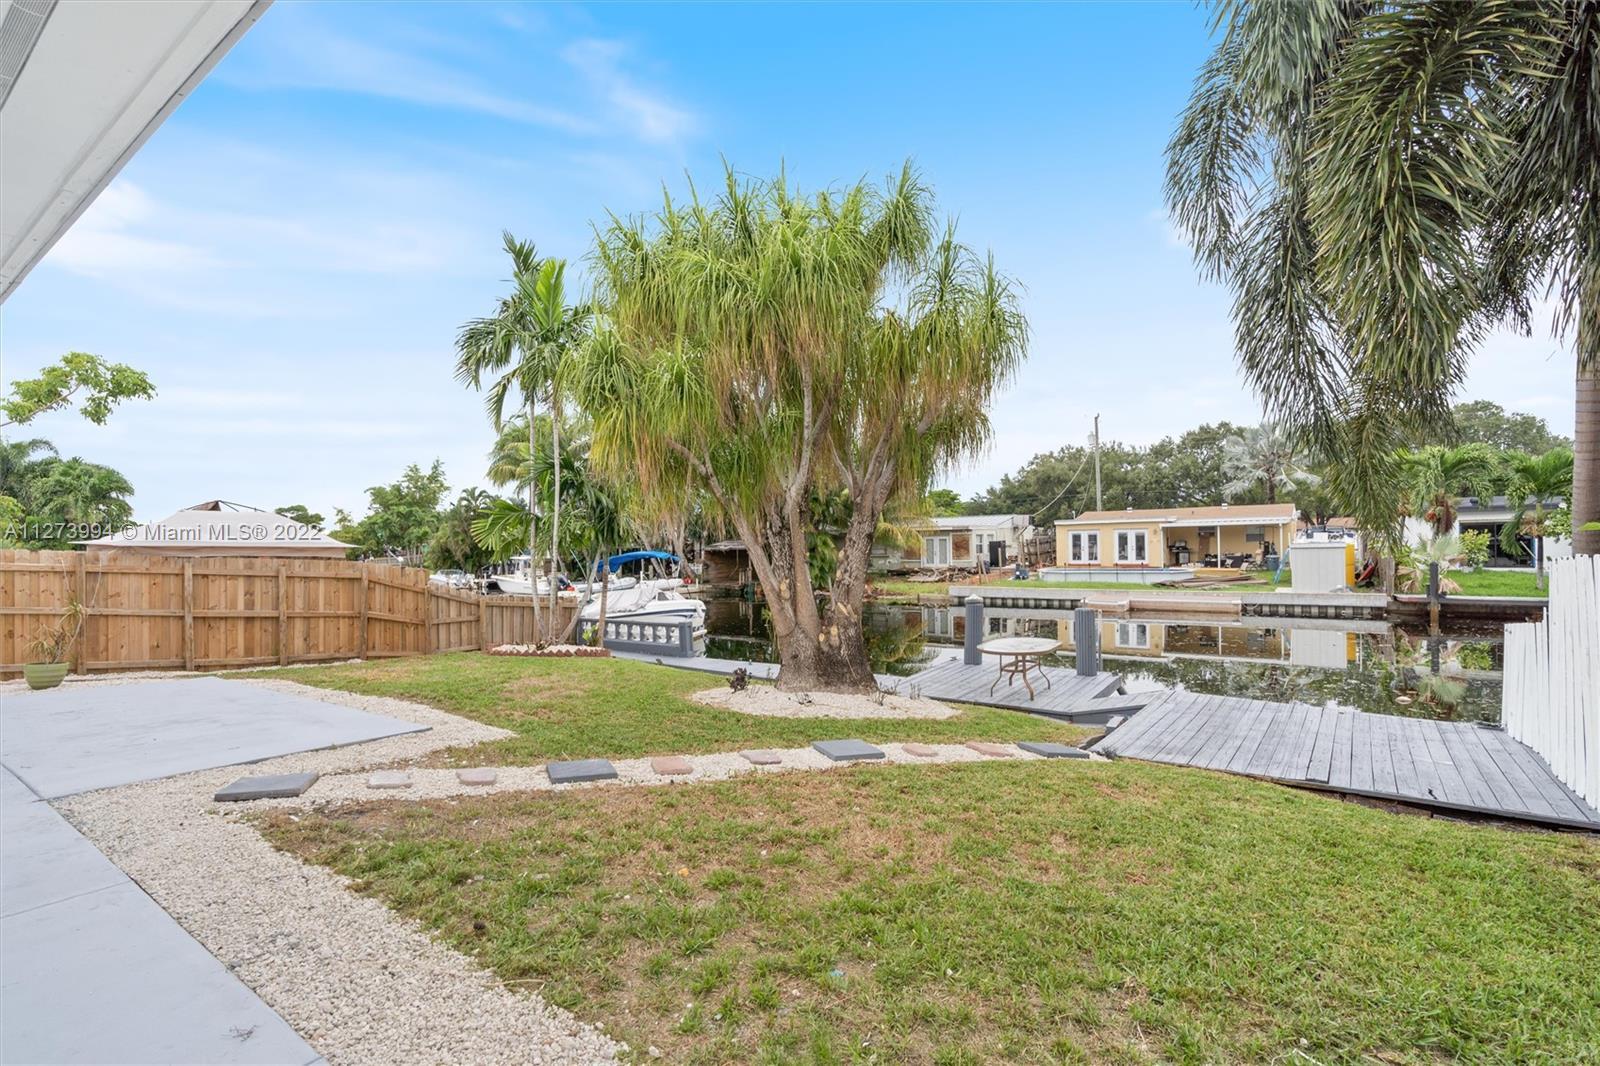 Substantially upgraded conveniently located ocean access canal front property in east Hollywood area